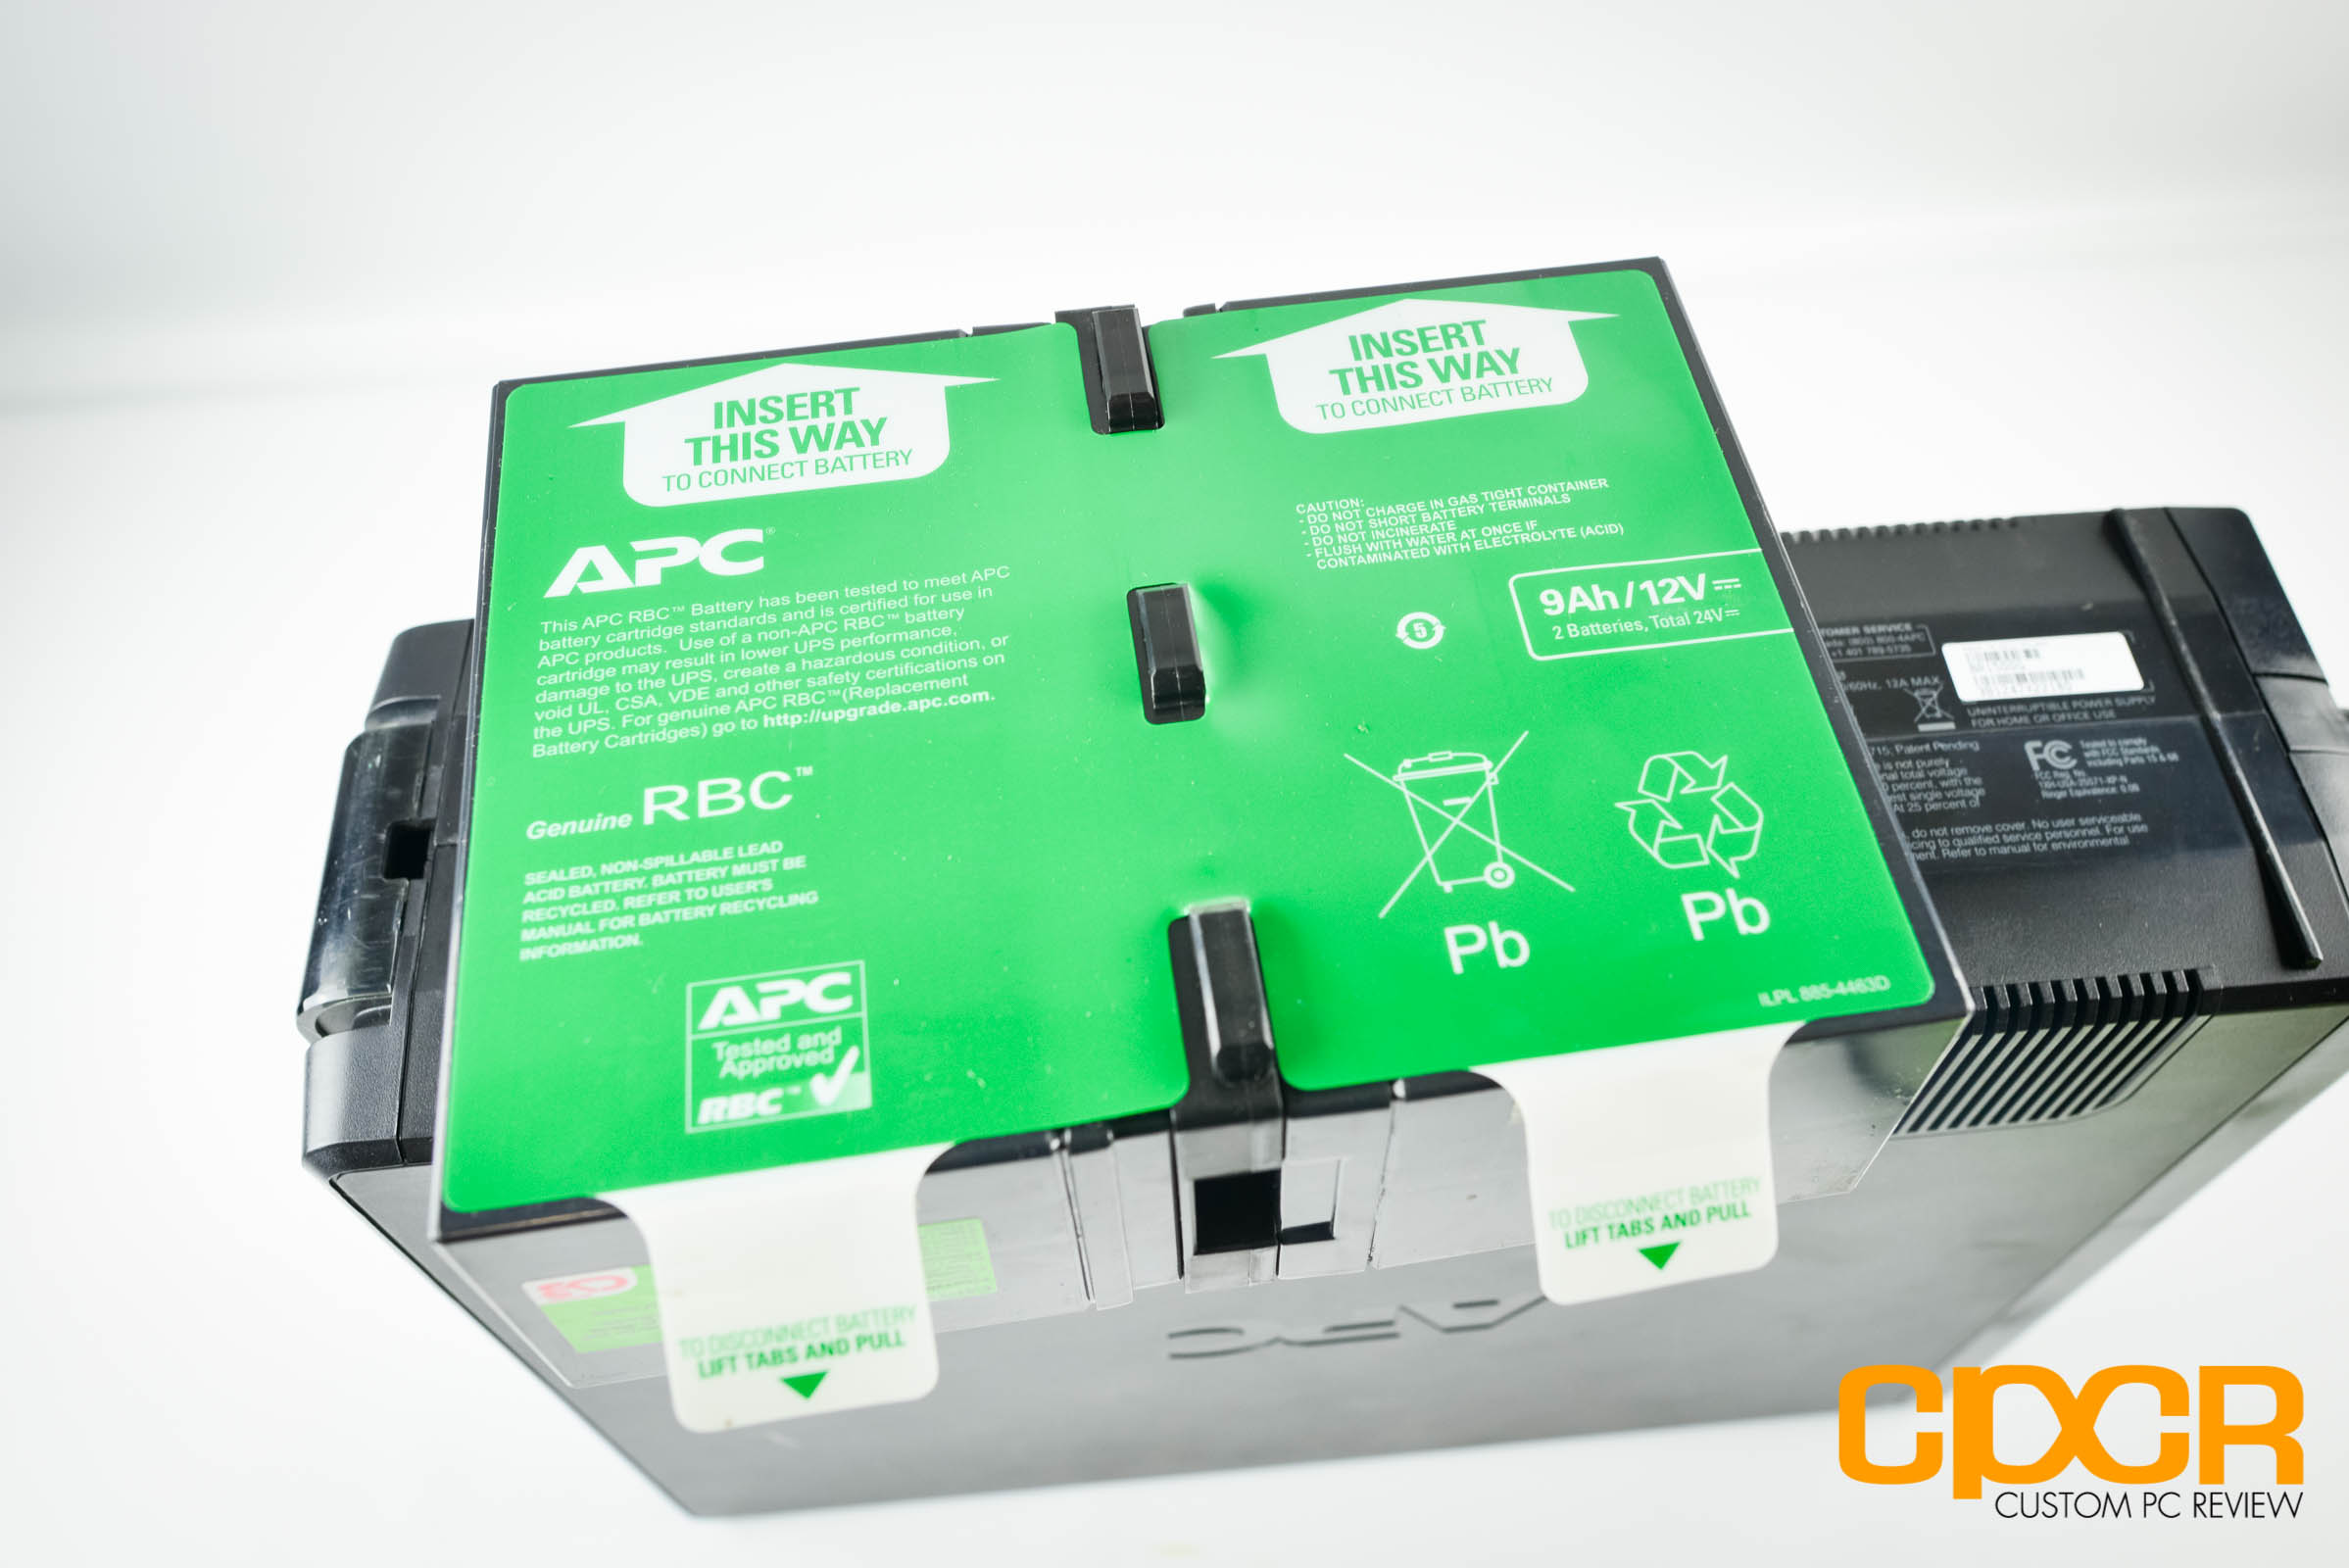 APC Back-UPS Pro 1500VA Review: Plenty of Power, Outlets, and Hot Swappable  Batteries